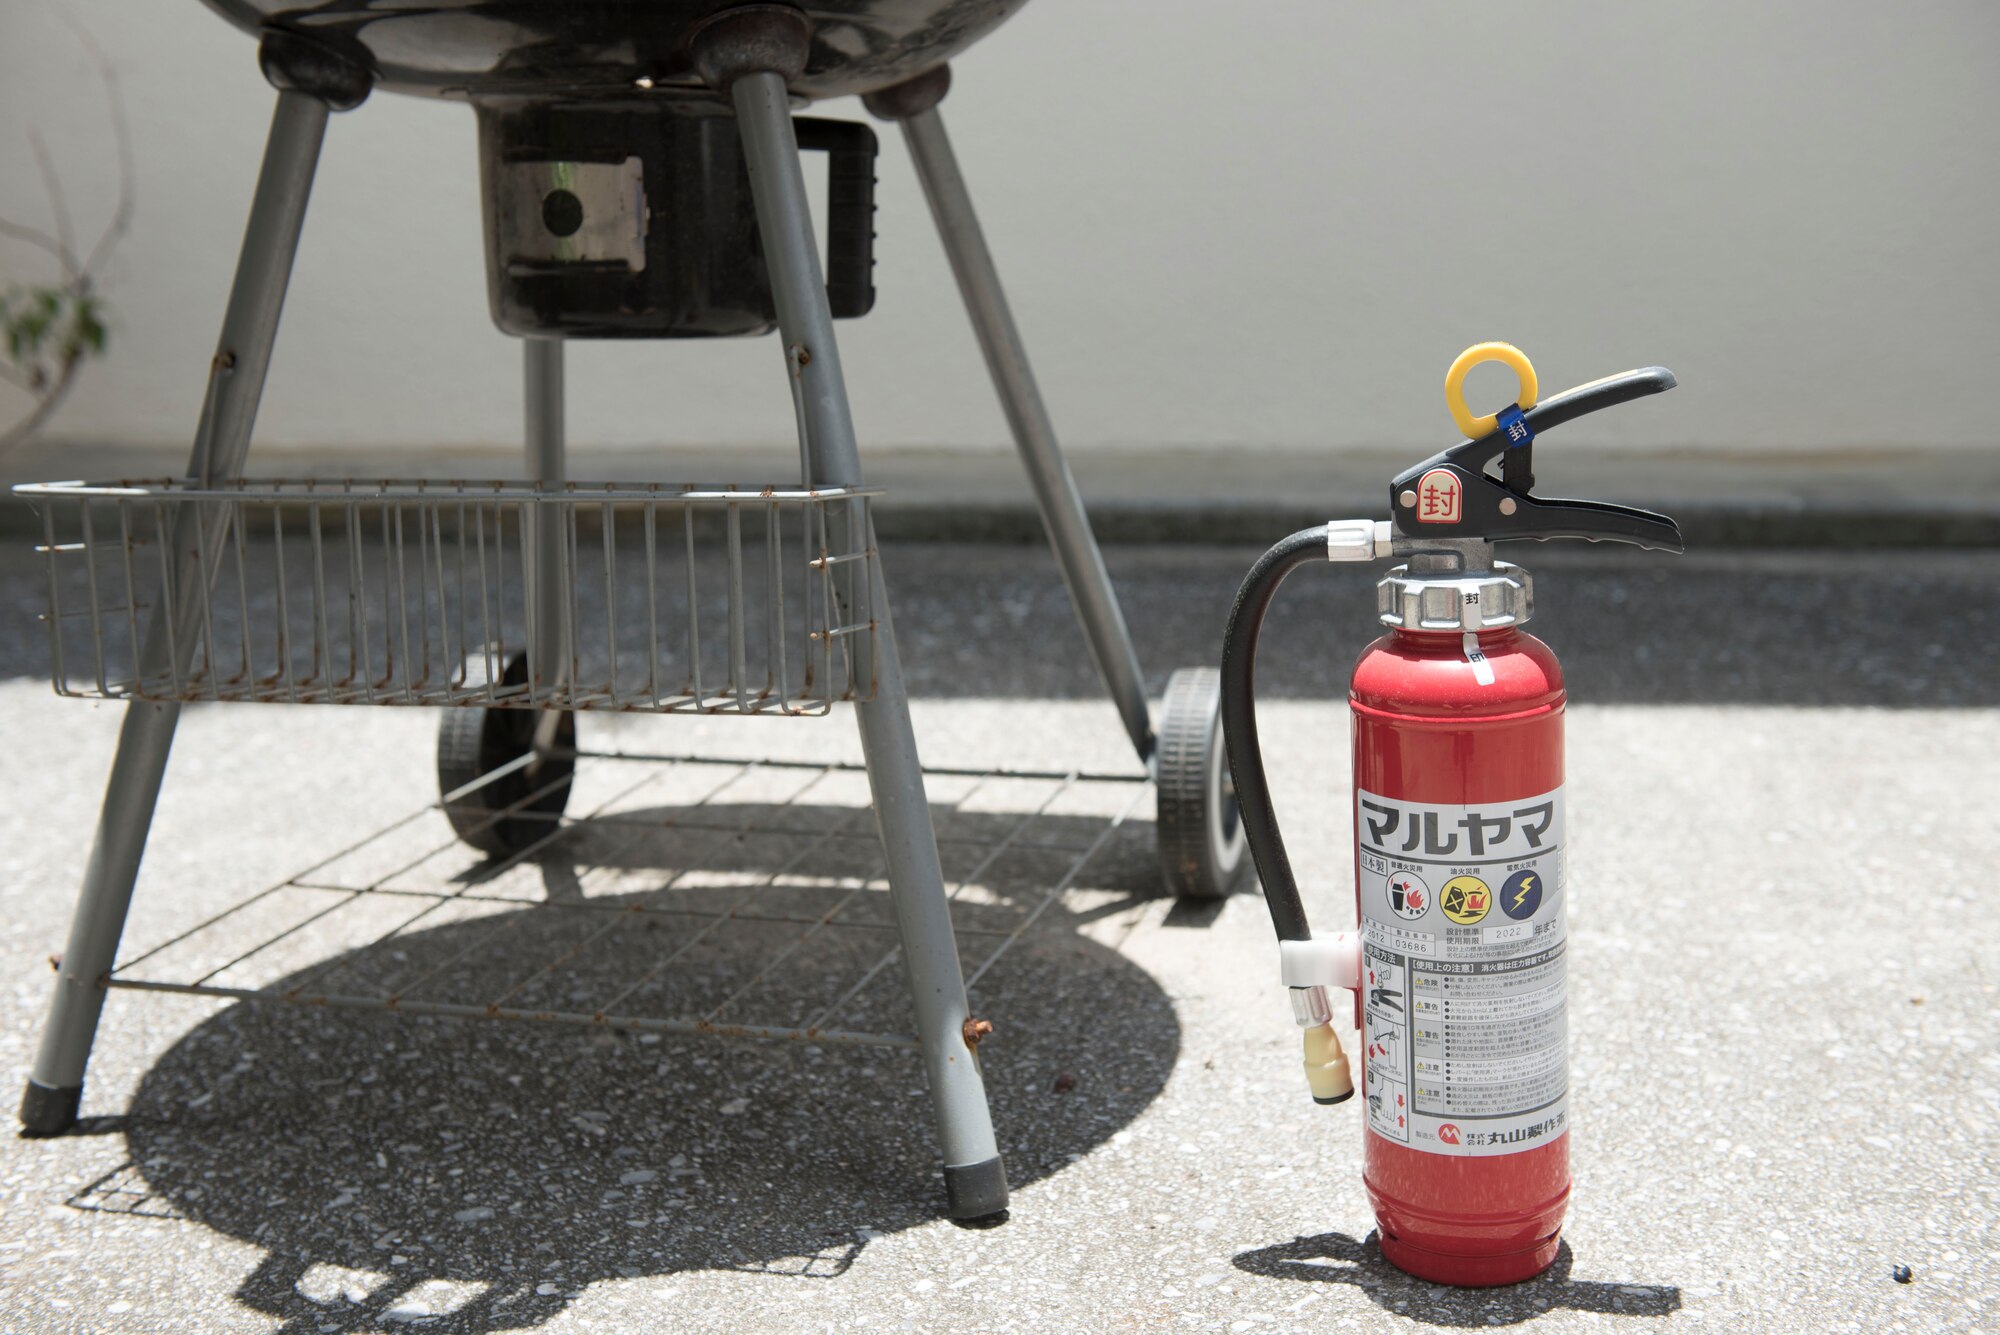 A fire extinguisher sits next to a grill June 28, 2017, at Kadena Air Base, Japan. Maintaining a fire extinguisher is especially important to help control a fire in the event of an emergency. (U.S Air Force photo by Senior Airman Quay Drawdy)